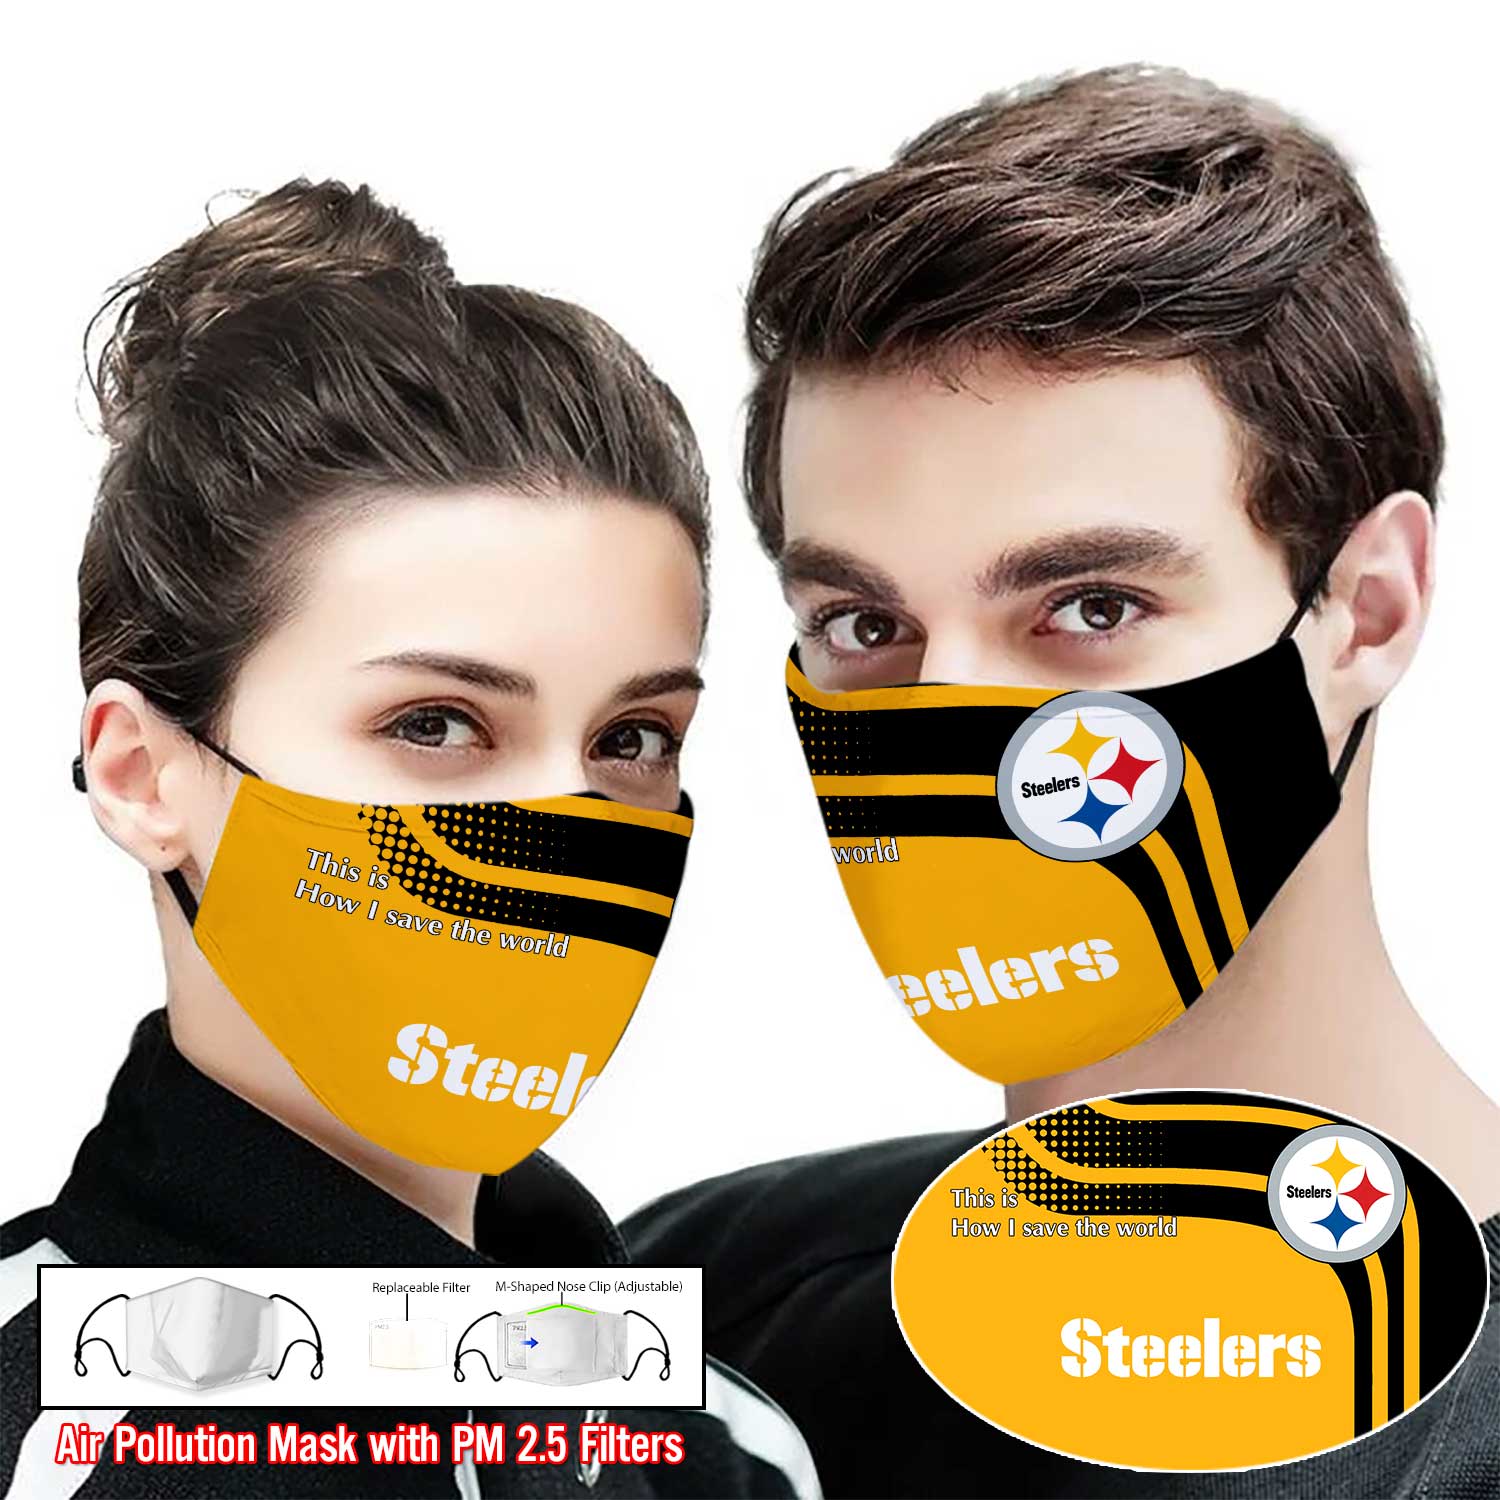 Pittsburgh steelers this is how i save the world full printing face mask